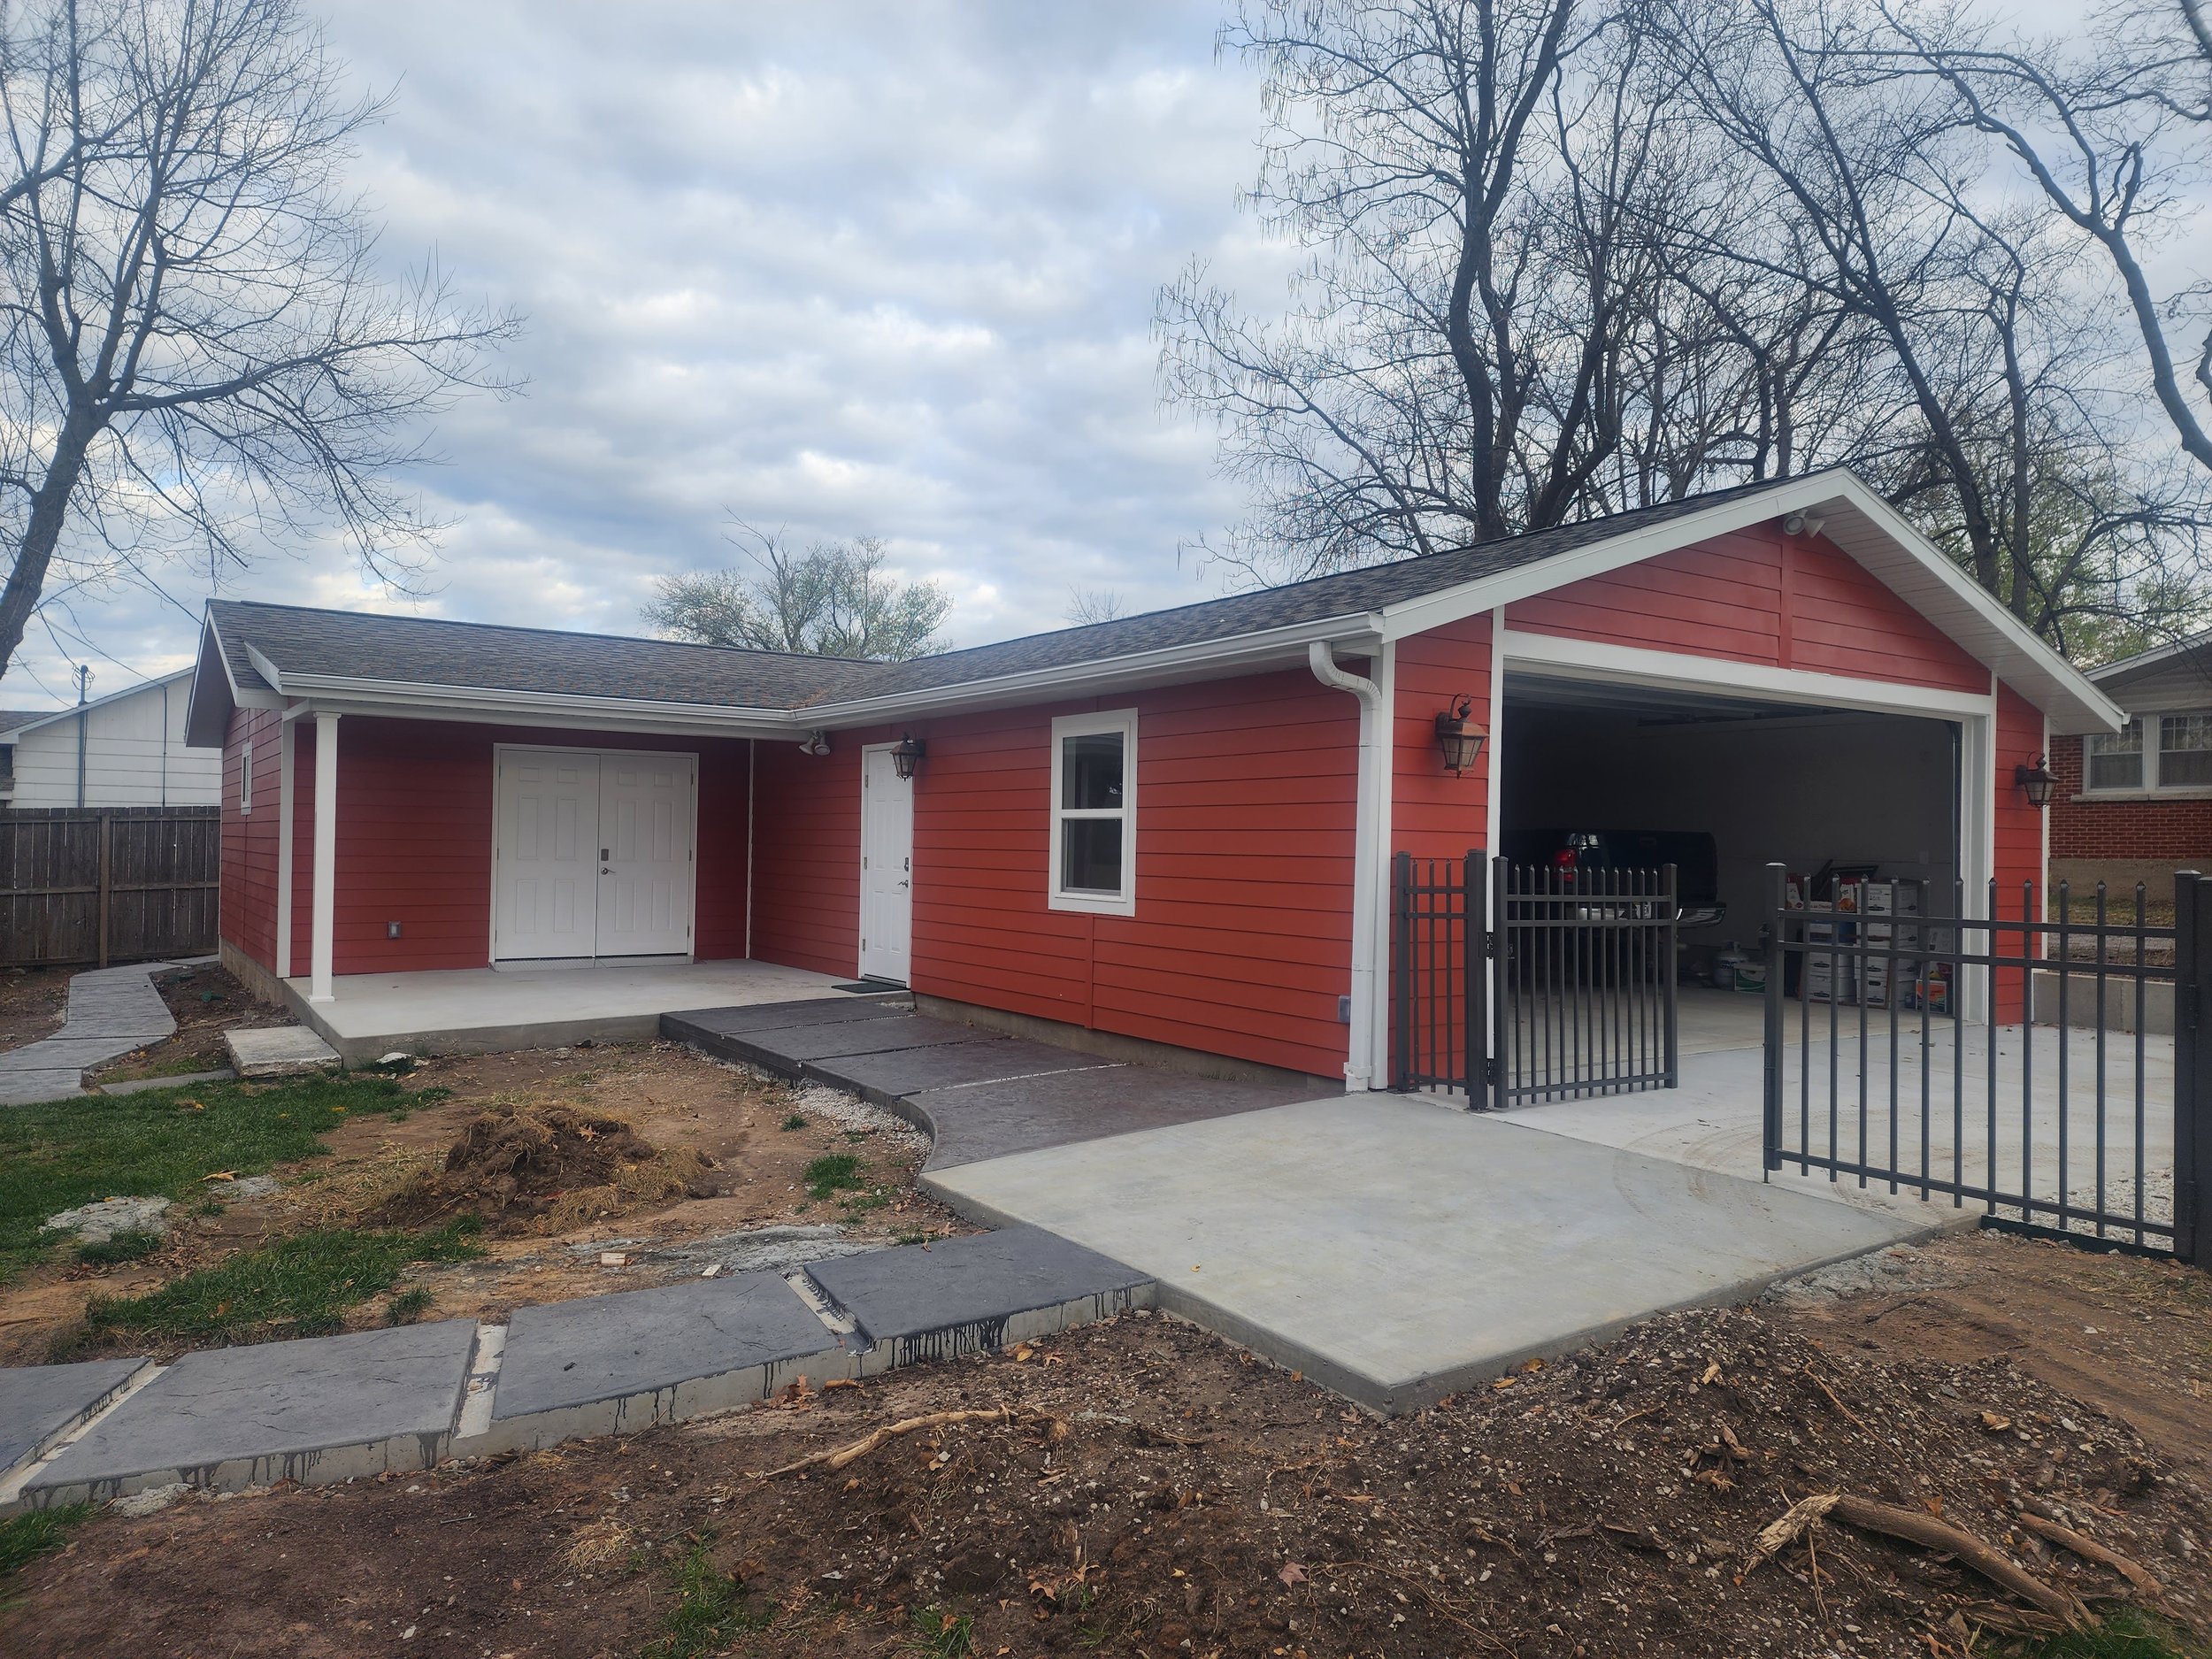  newly built garage and outbuilding with red siding and white doors 